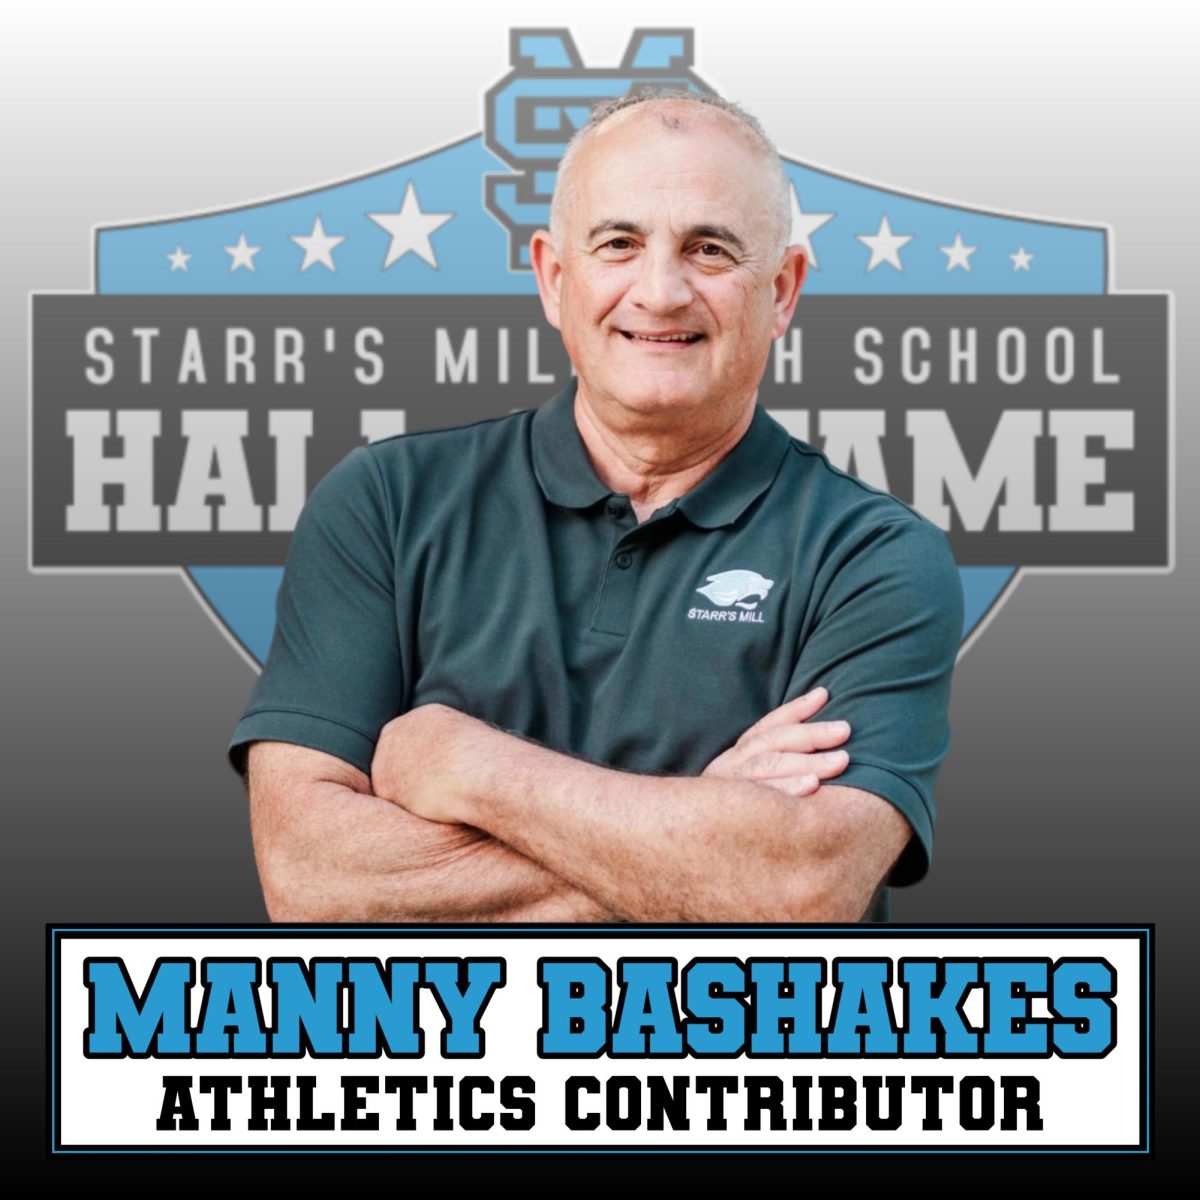 Manny Bashakes is an inductee into the inaugural class of the Starr’s Mill Hall of Fame. Although Bashakes never attended Starr’s Mill, he played a significant role in helping to kick off school sports by volunteering in field maintenance. Bashakes has been maintaining the practice fields for nearly thirty years, and continues to maintain the fields and equipment at least once a week.